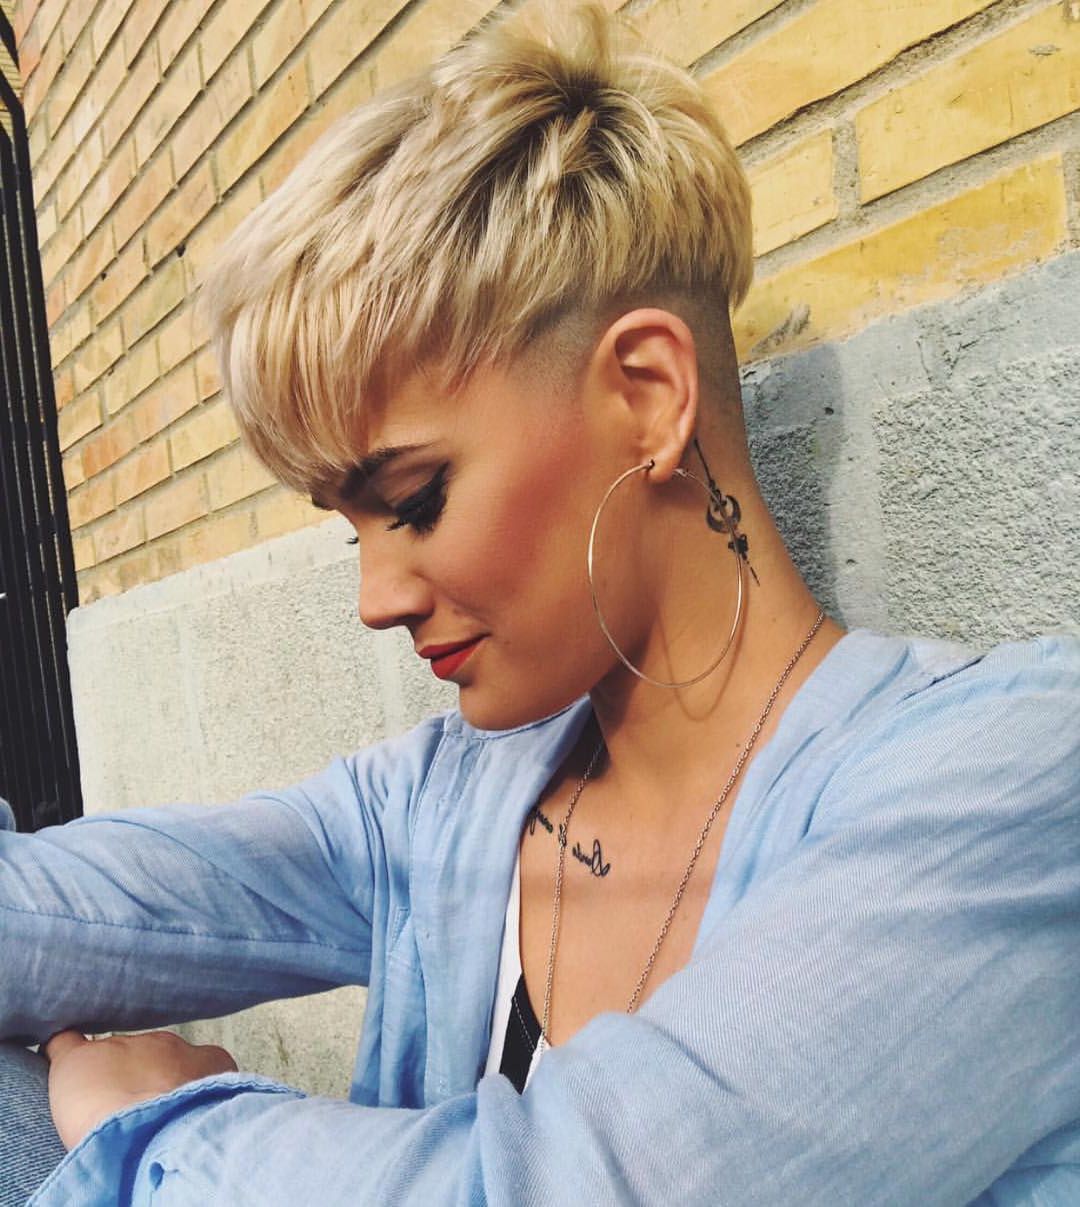 10 Stylish Pixie Haircuts – Women Short Undercut Hairstyles 2018 – 2019 Intended For White Bob Undercut Hairstyles With Root Fade (View 15 of 20)